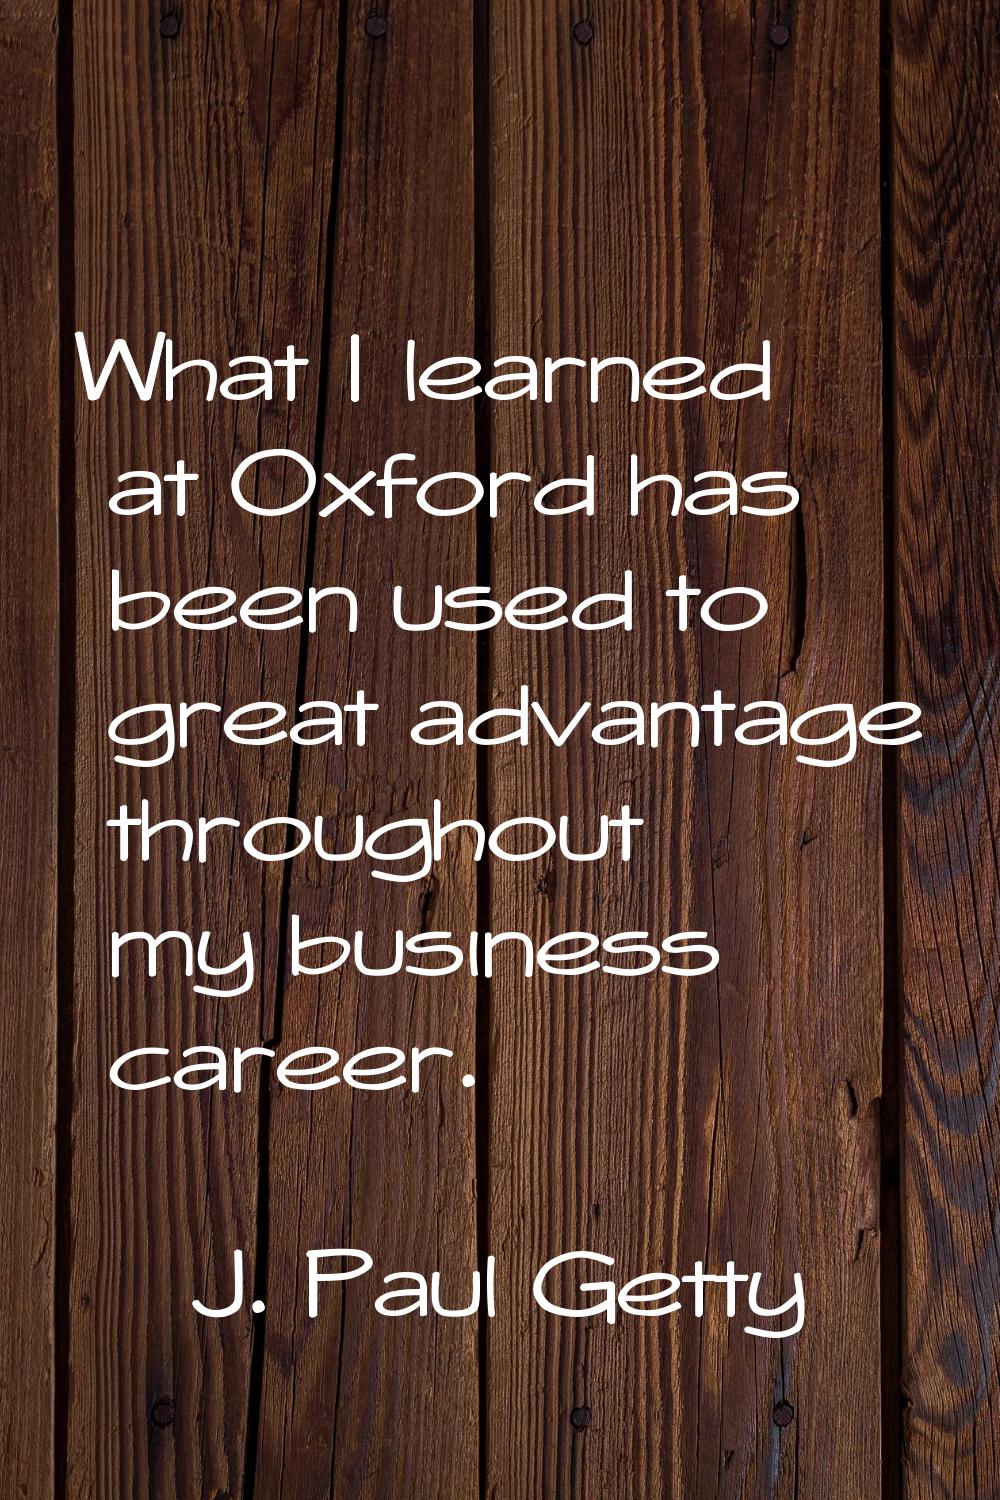 What I learned at Oxford has been used to great advantage throughout my business career.